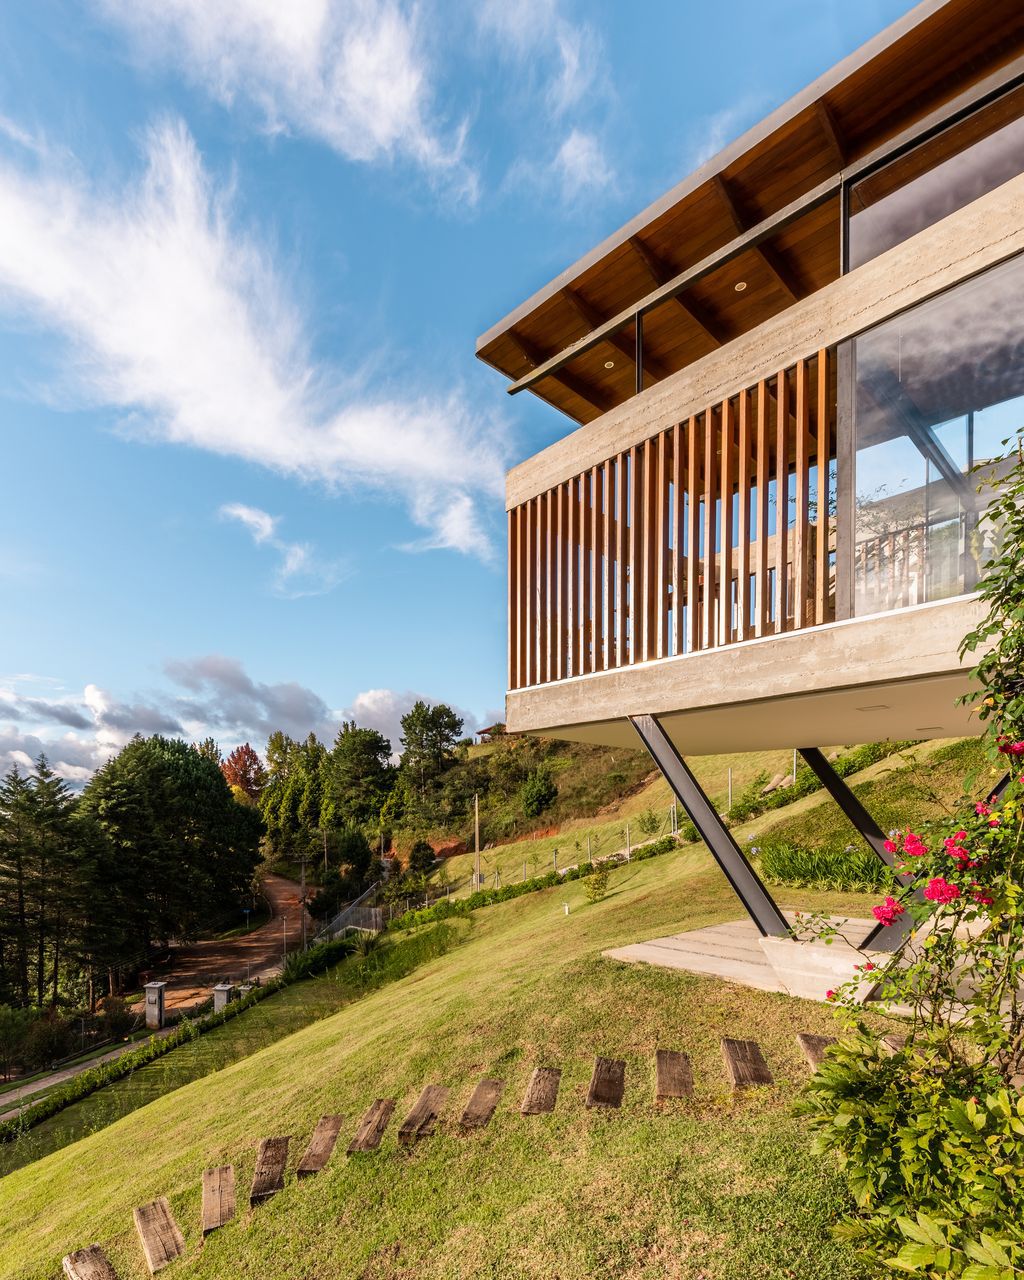 TKN House, a Stunning Mountain Home on Steep Site by OTP Arquitetura